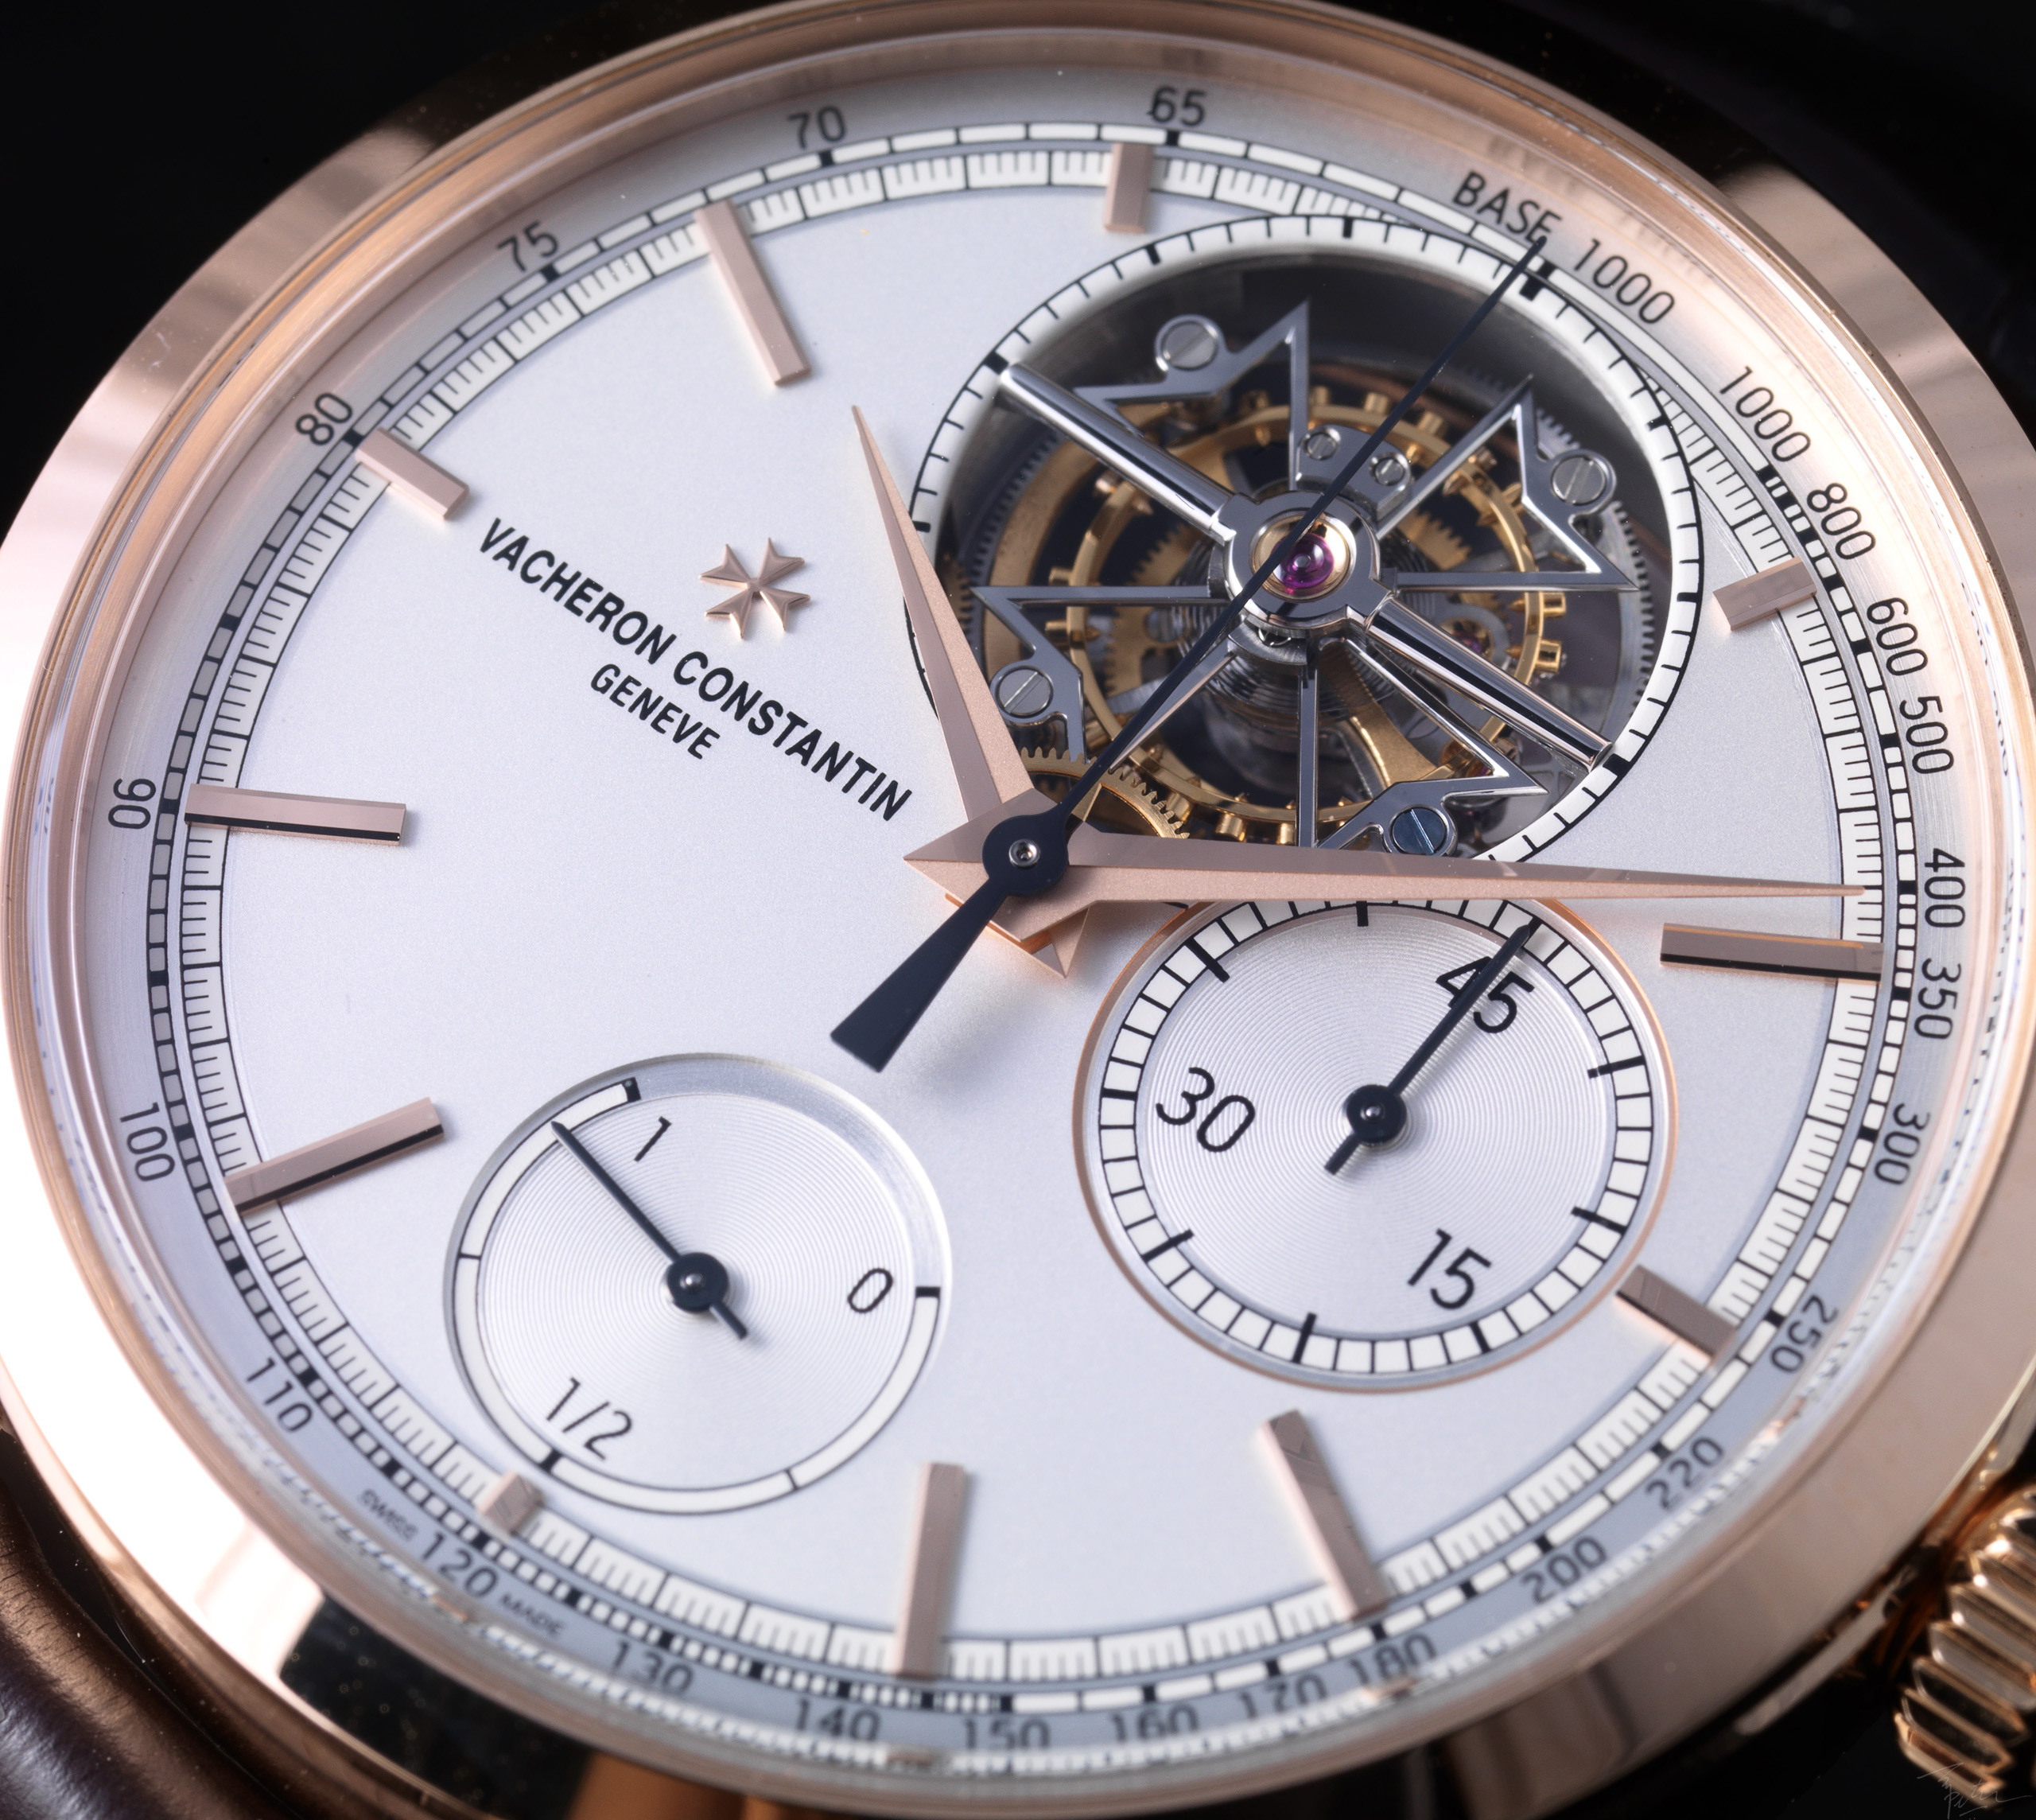 Review with Watchscapes: Vacheron Constantin Traditionelle Tourbillon  Chronograph -